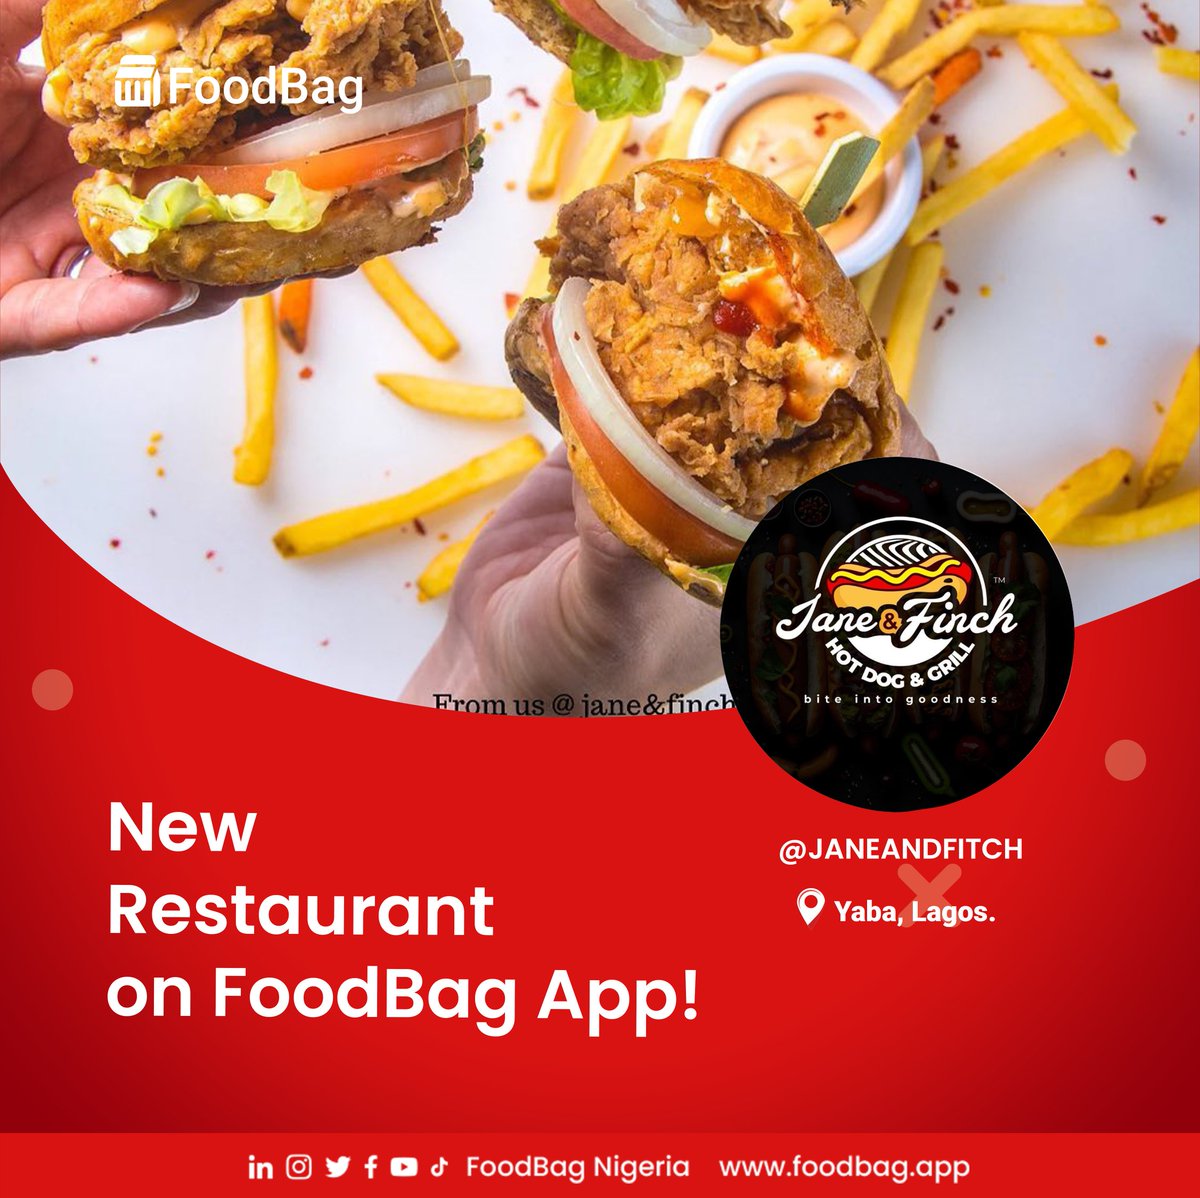 Welcome @janeandfinch_hotdog_and_grill 

Netflix and chill with Hot dog & grill from @janeandfinch_hotdog_and_grill 

Now available on the FoodBag App
Enjoy @foodbag_ng Enjoy @janeandfinch_hotdog_and_grill 

#foodbag_ng #FoodBagisComing #fooddeliveryapp #fastdelivery💯